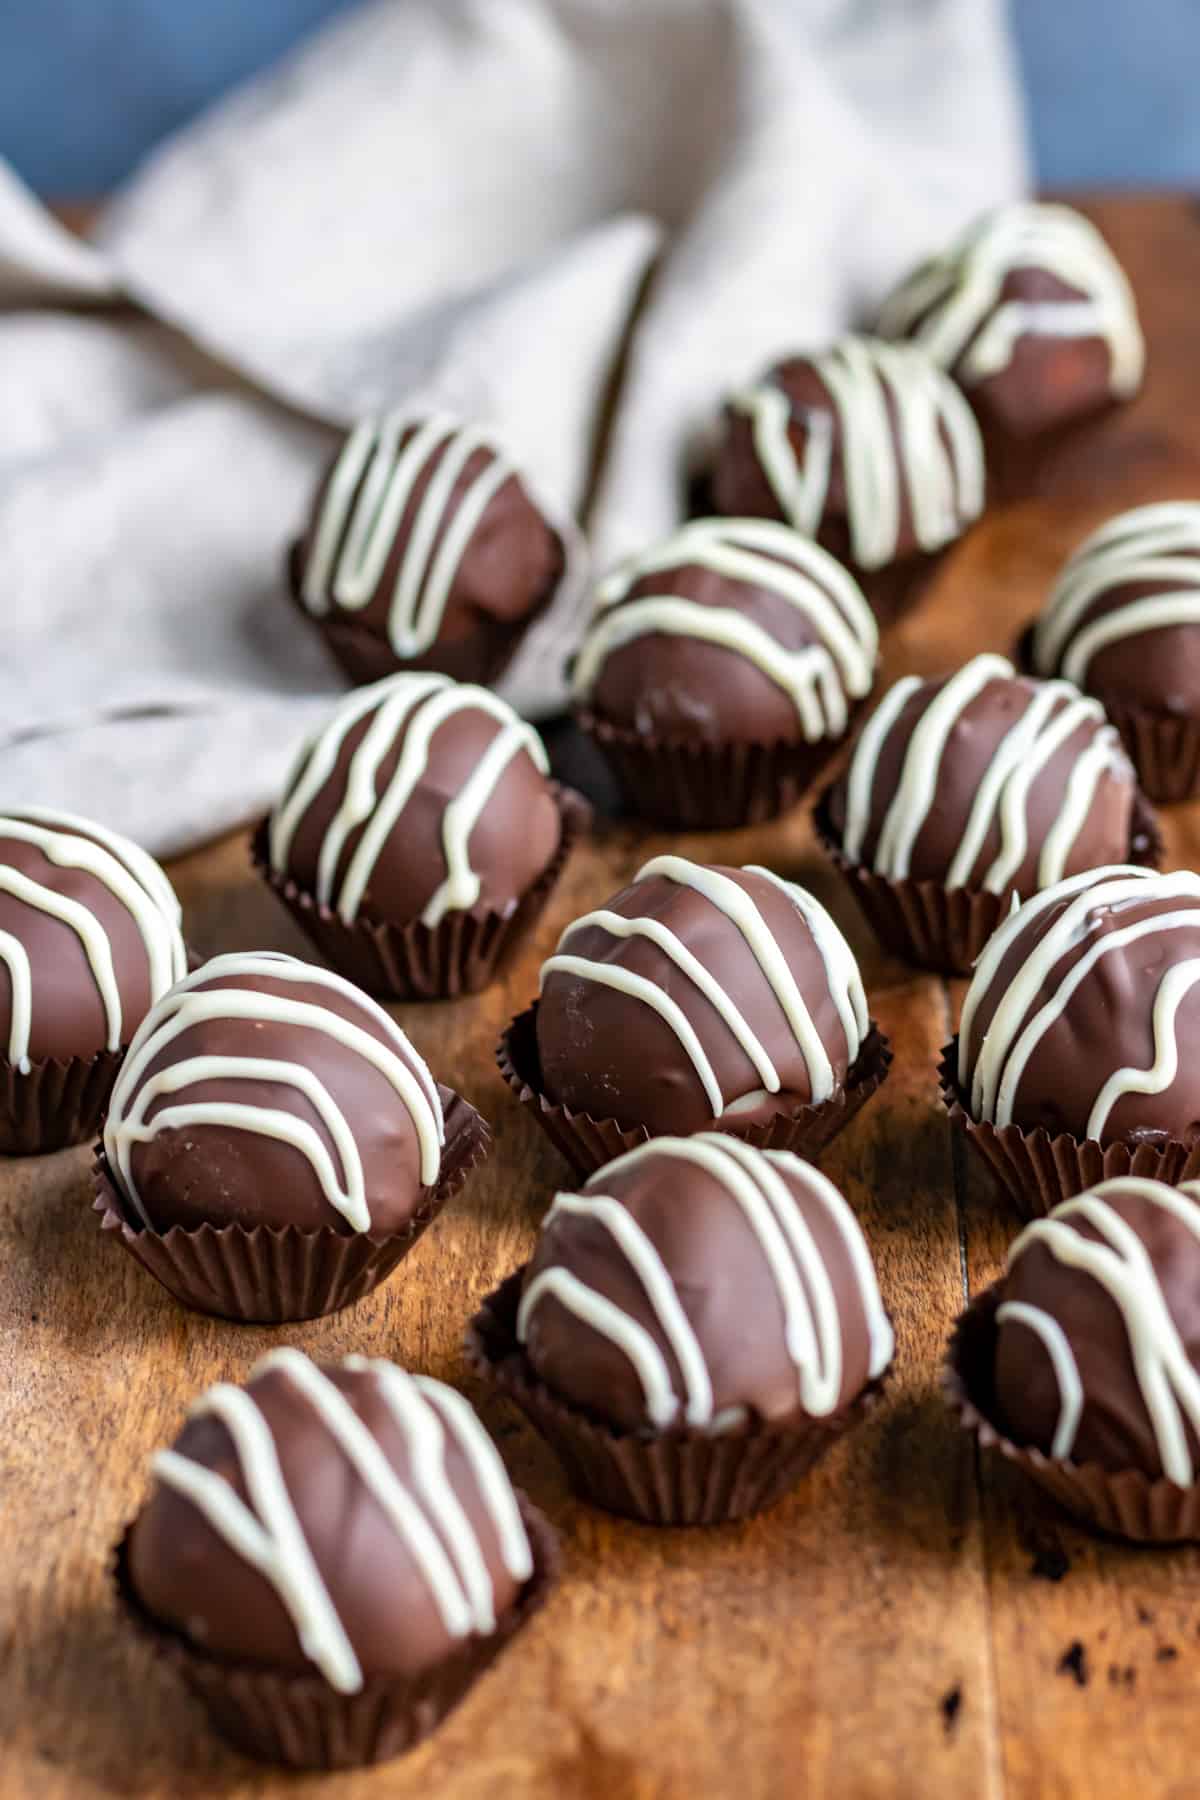 A table of chocolate covered marzipan balls.